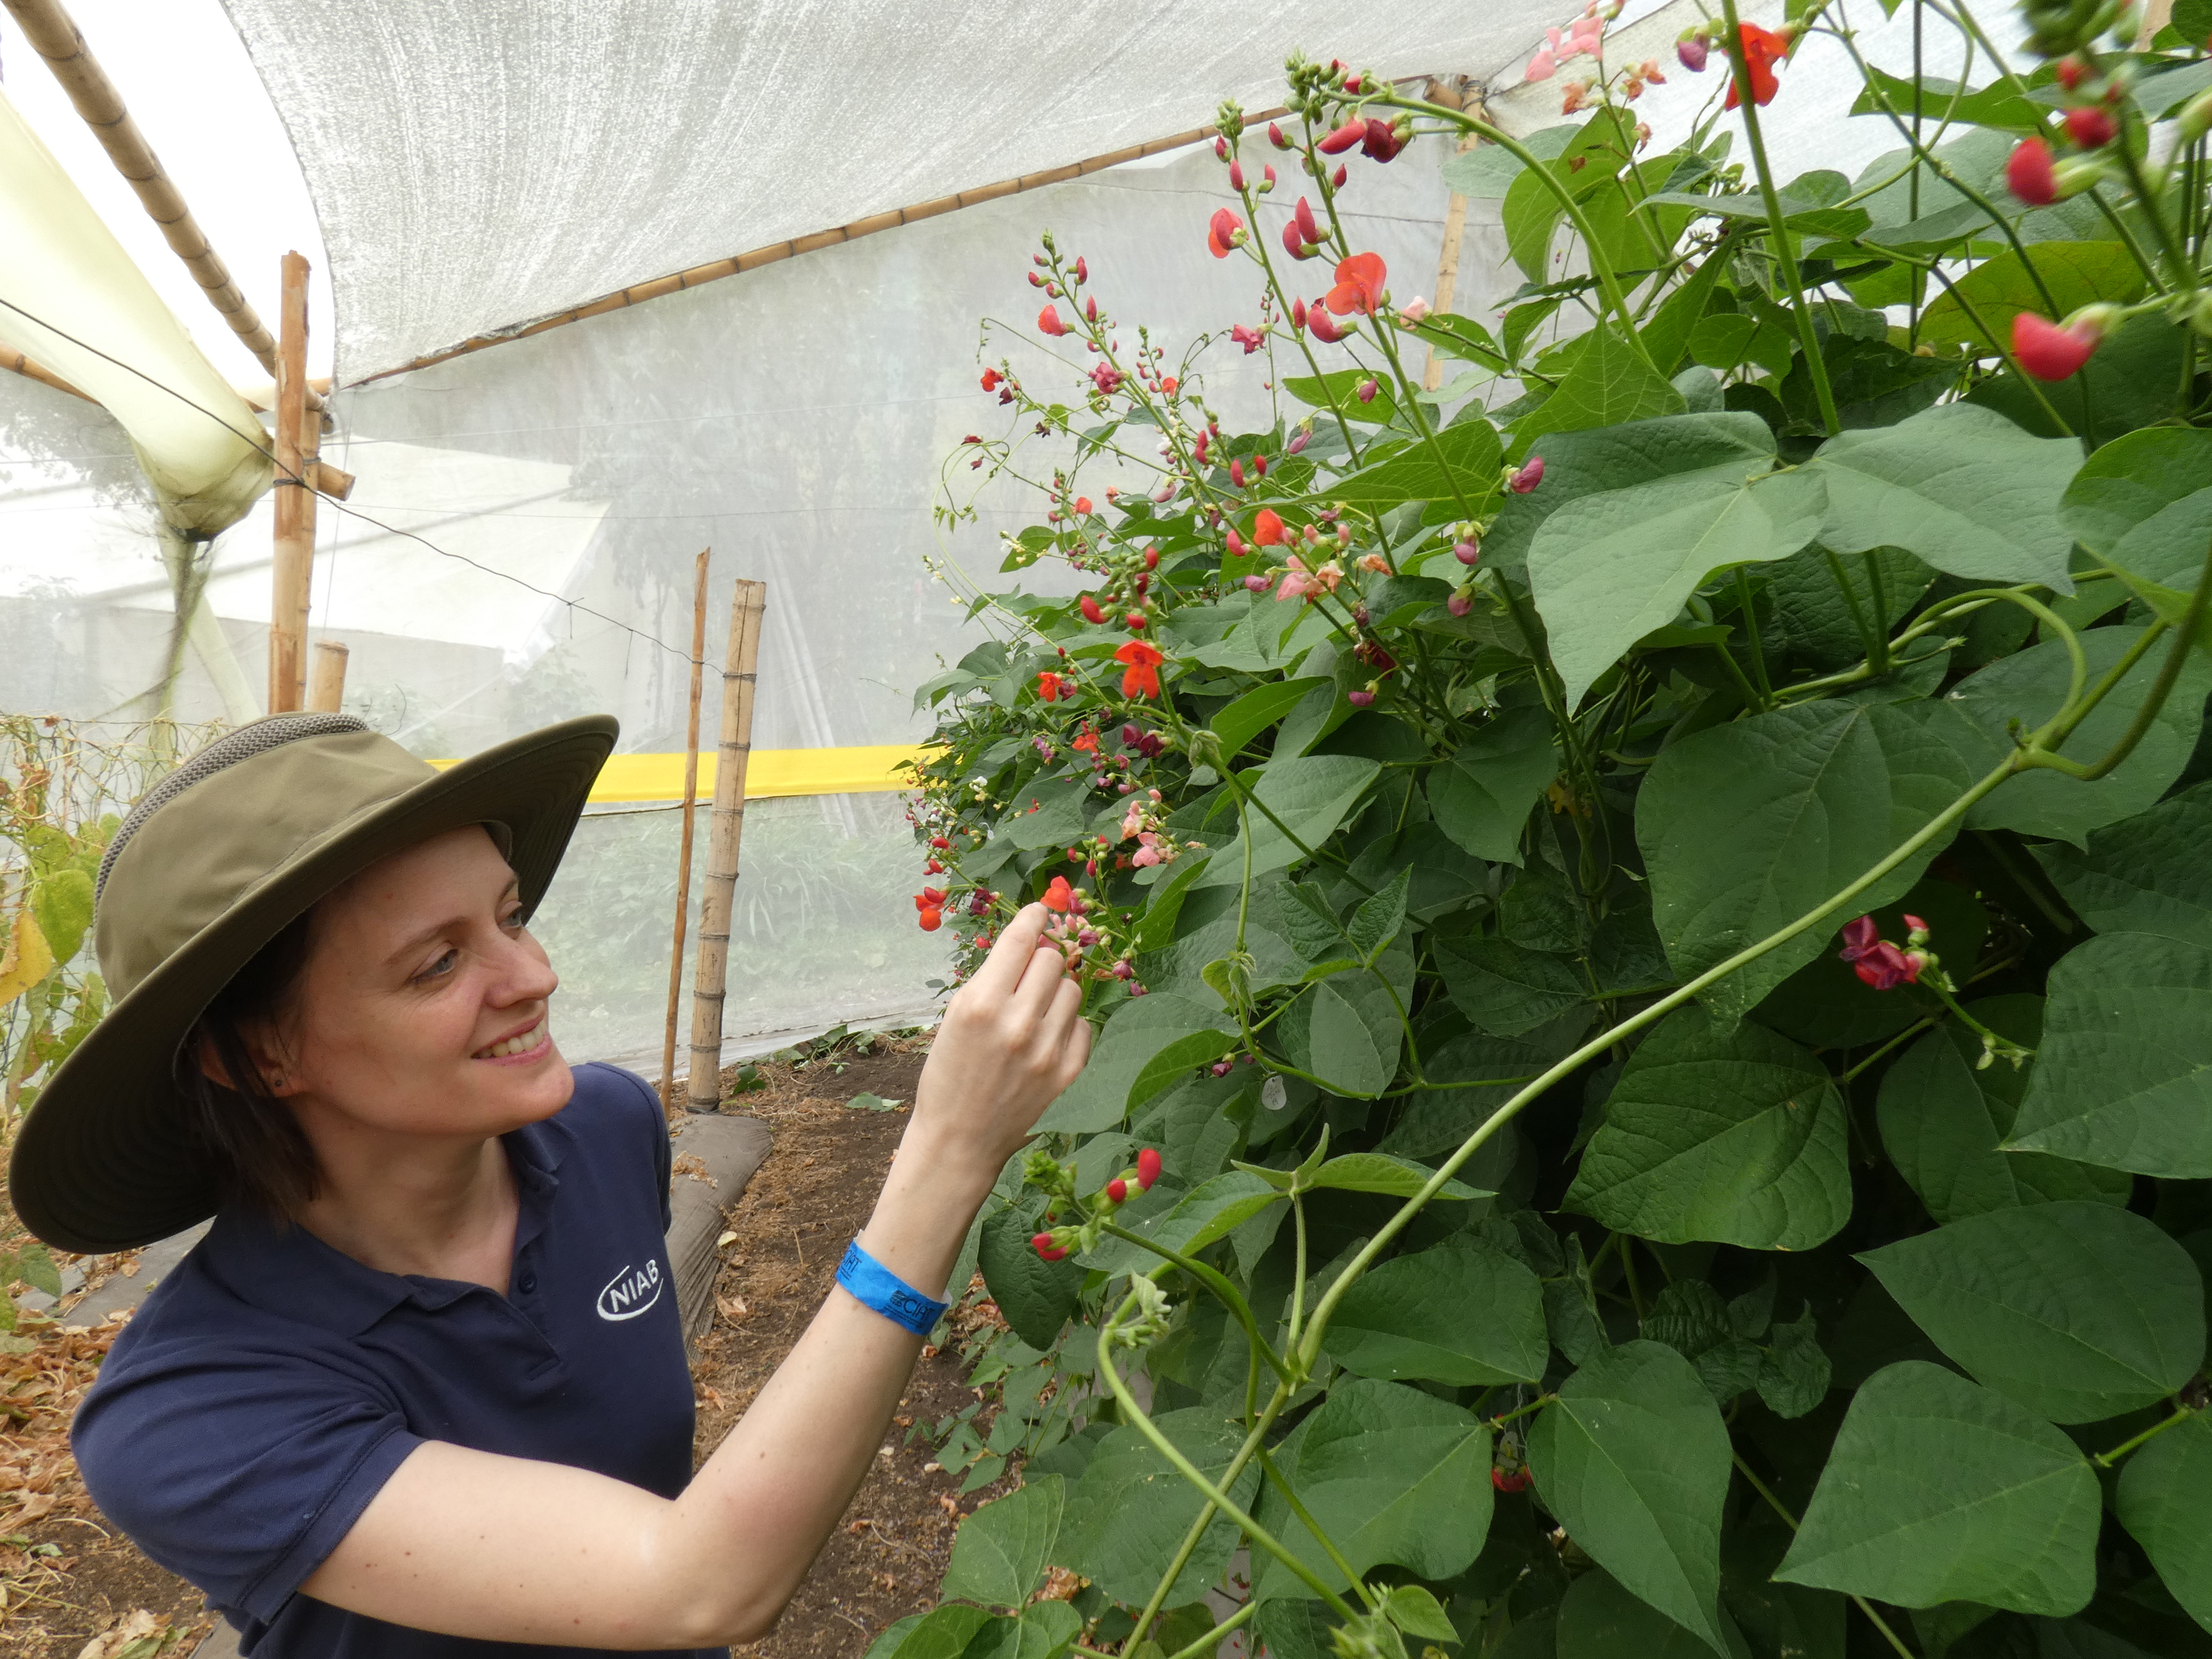 NIAB's Sarah Dyer investigating the P. coccineus at CIAT in Colombia